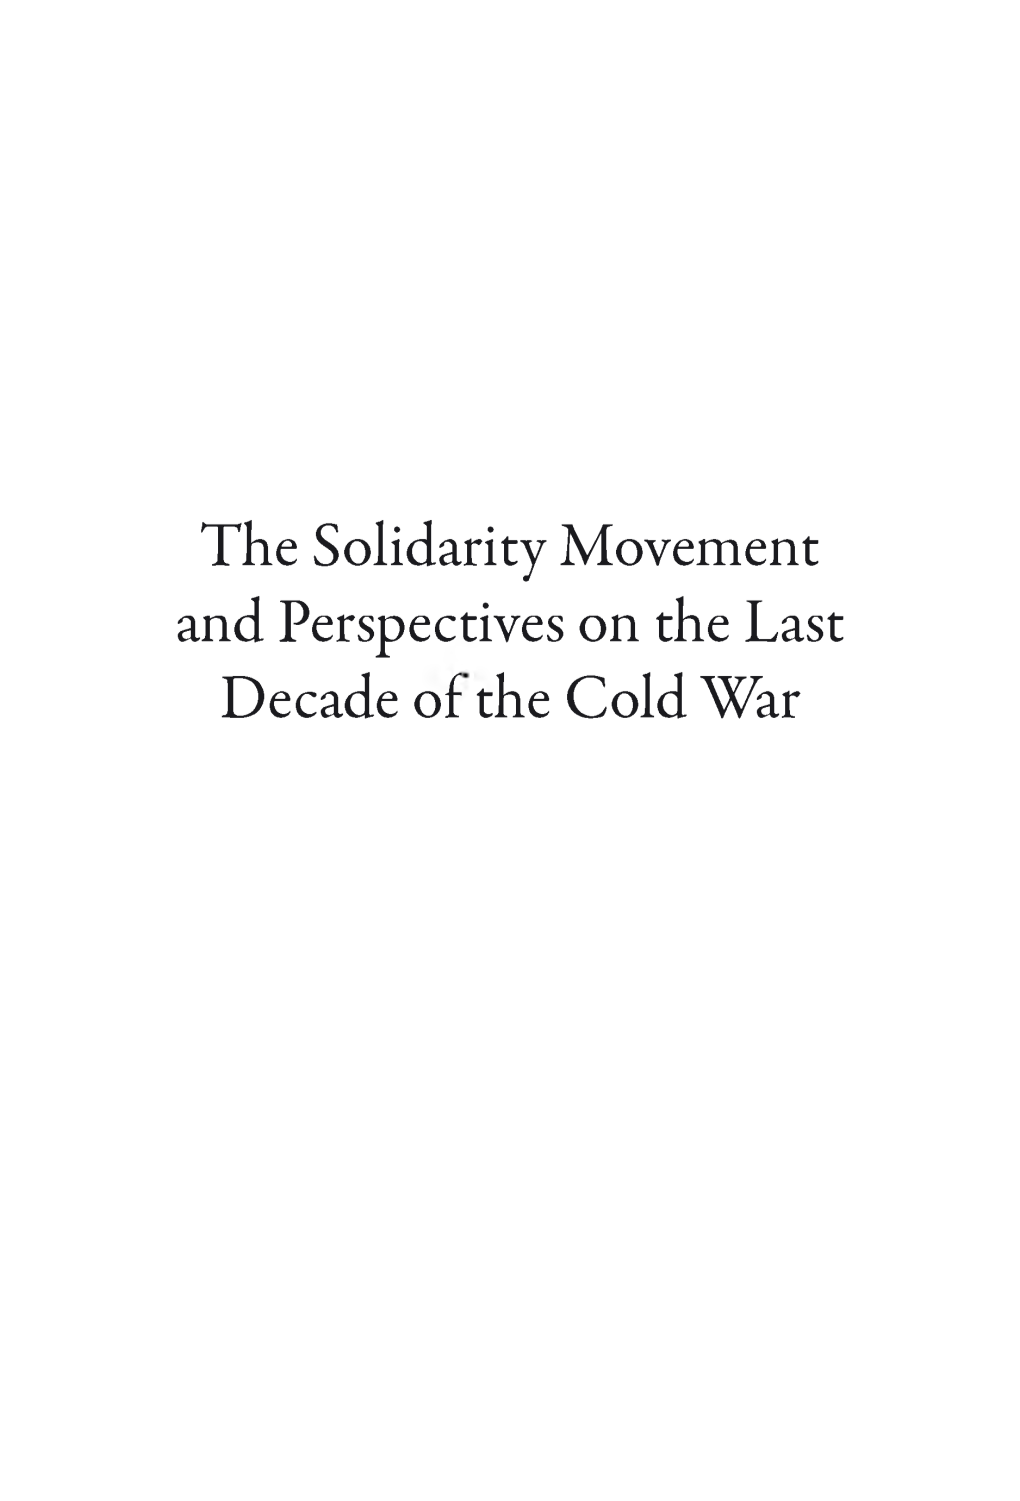 The Solidarity Movement and Perspectives on the Last Decade of the Cold War